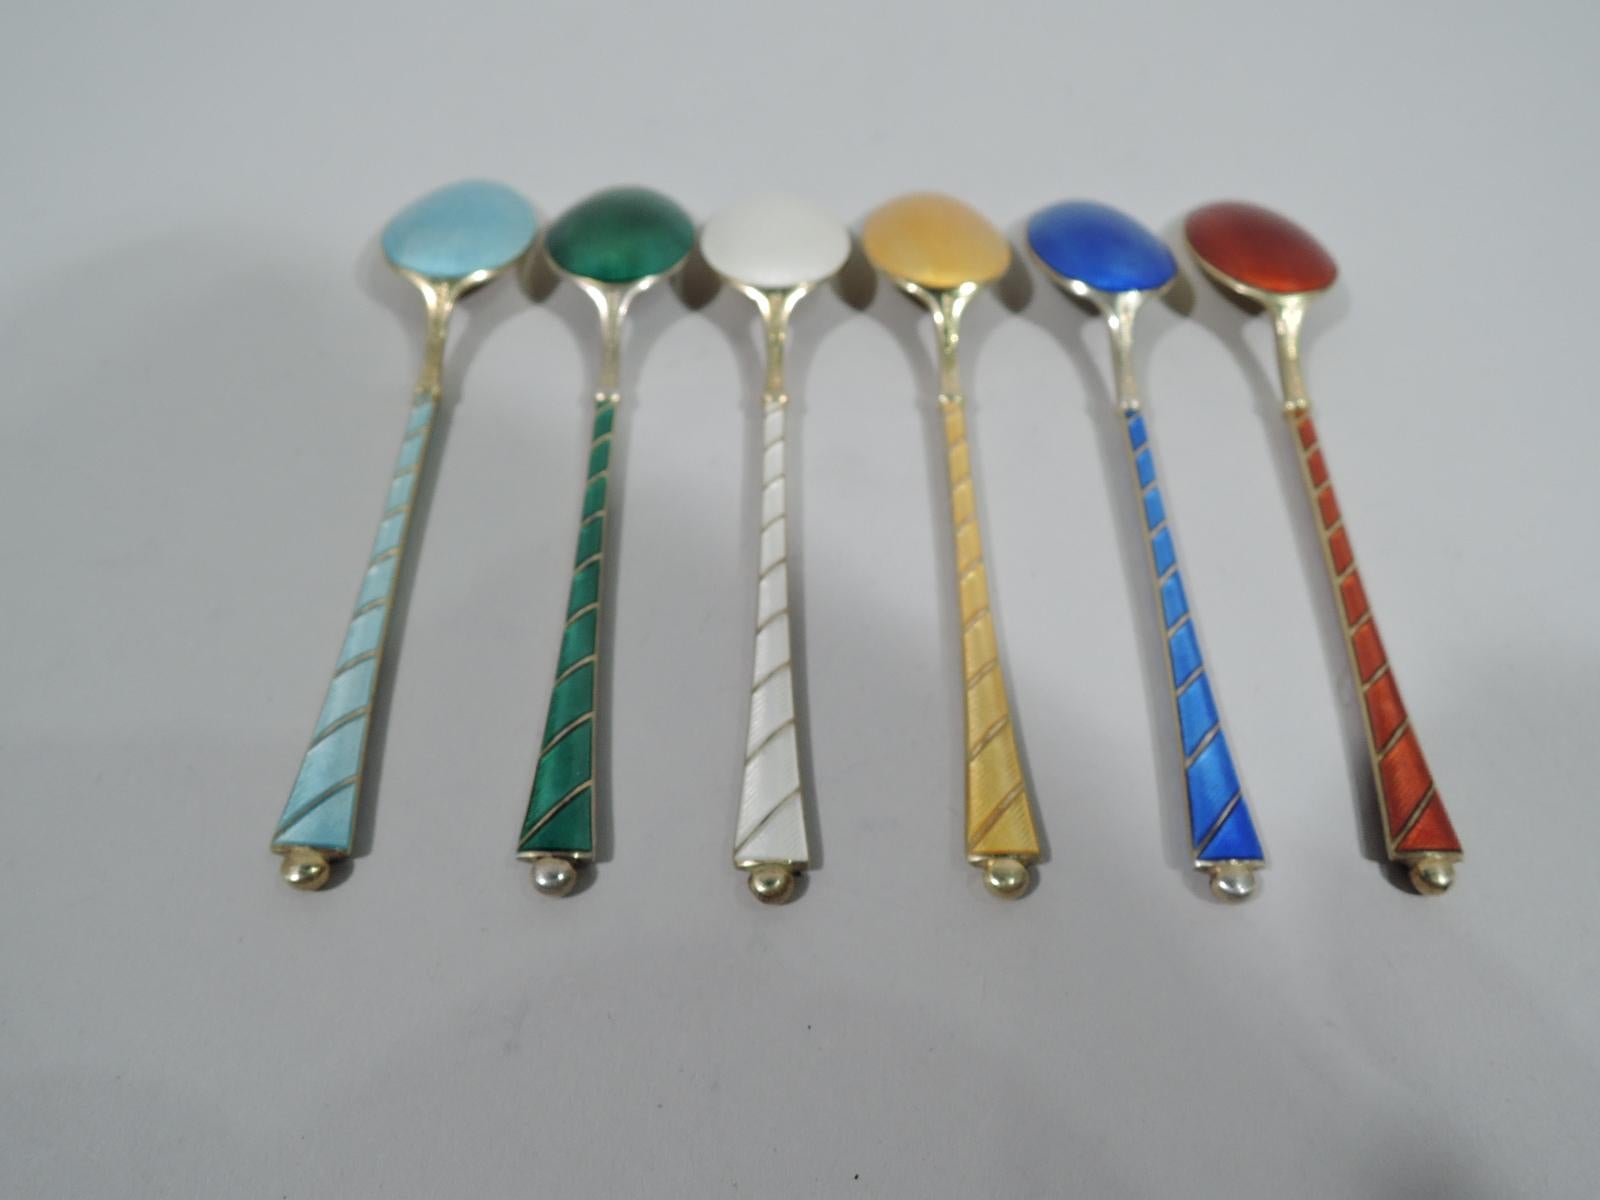 Set of 6 Mid-Century Modern gilt sterling silver and guilloche enamel demitasse spoons. Made by Egon Lauridsen in Denmark. Tapering handle with ball terminal and double-sided enameling in diagonal silver gilt frames. Bowl silver gilt with enameled